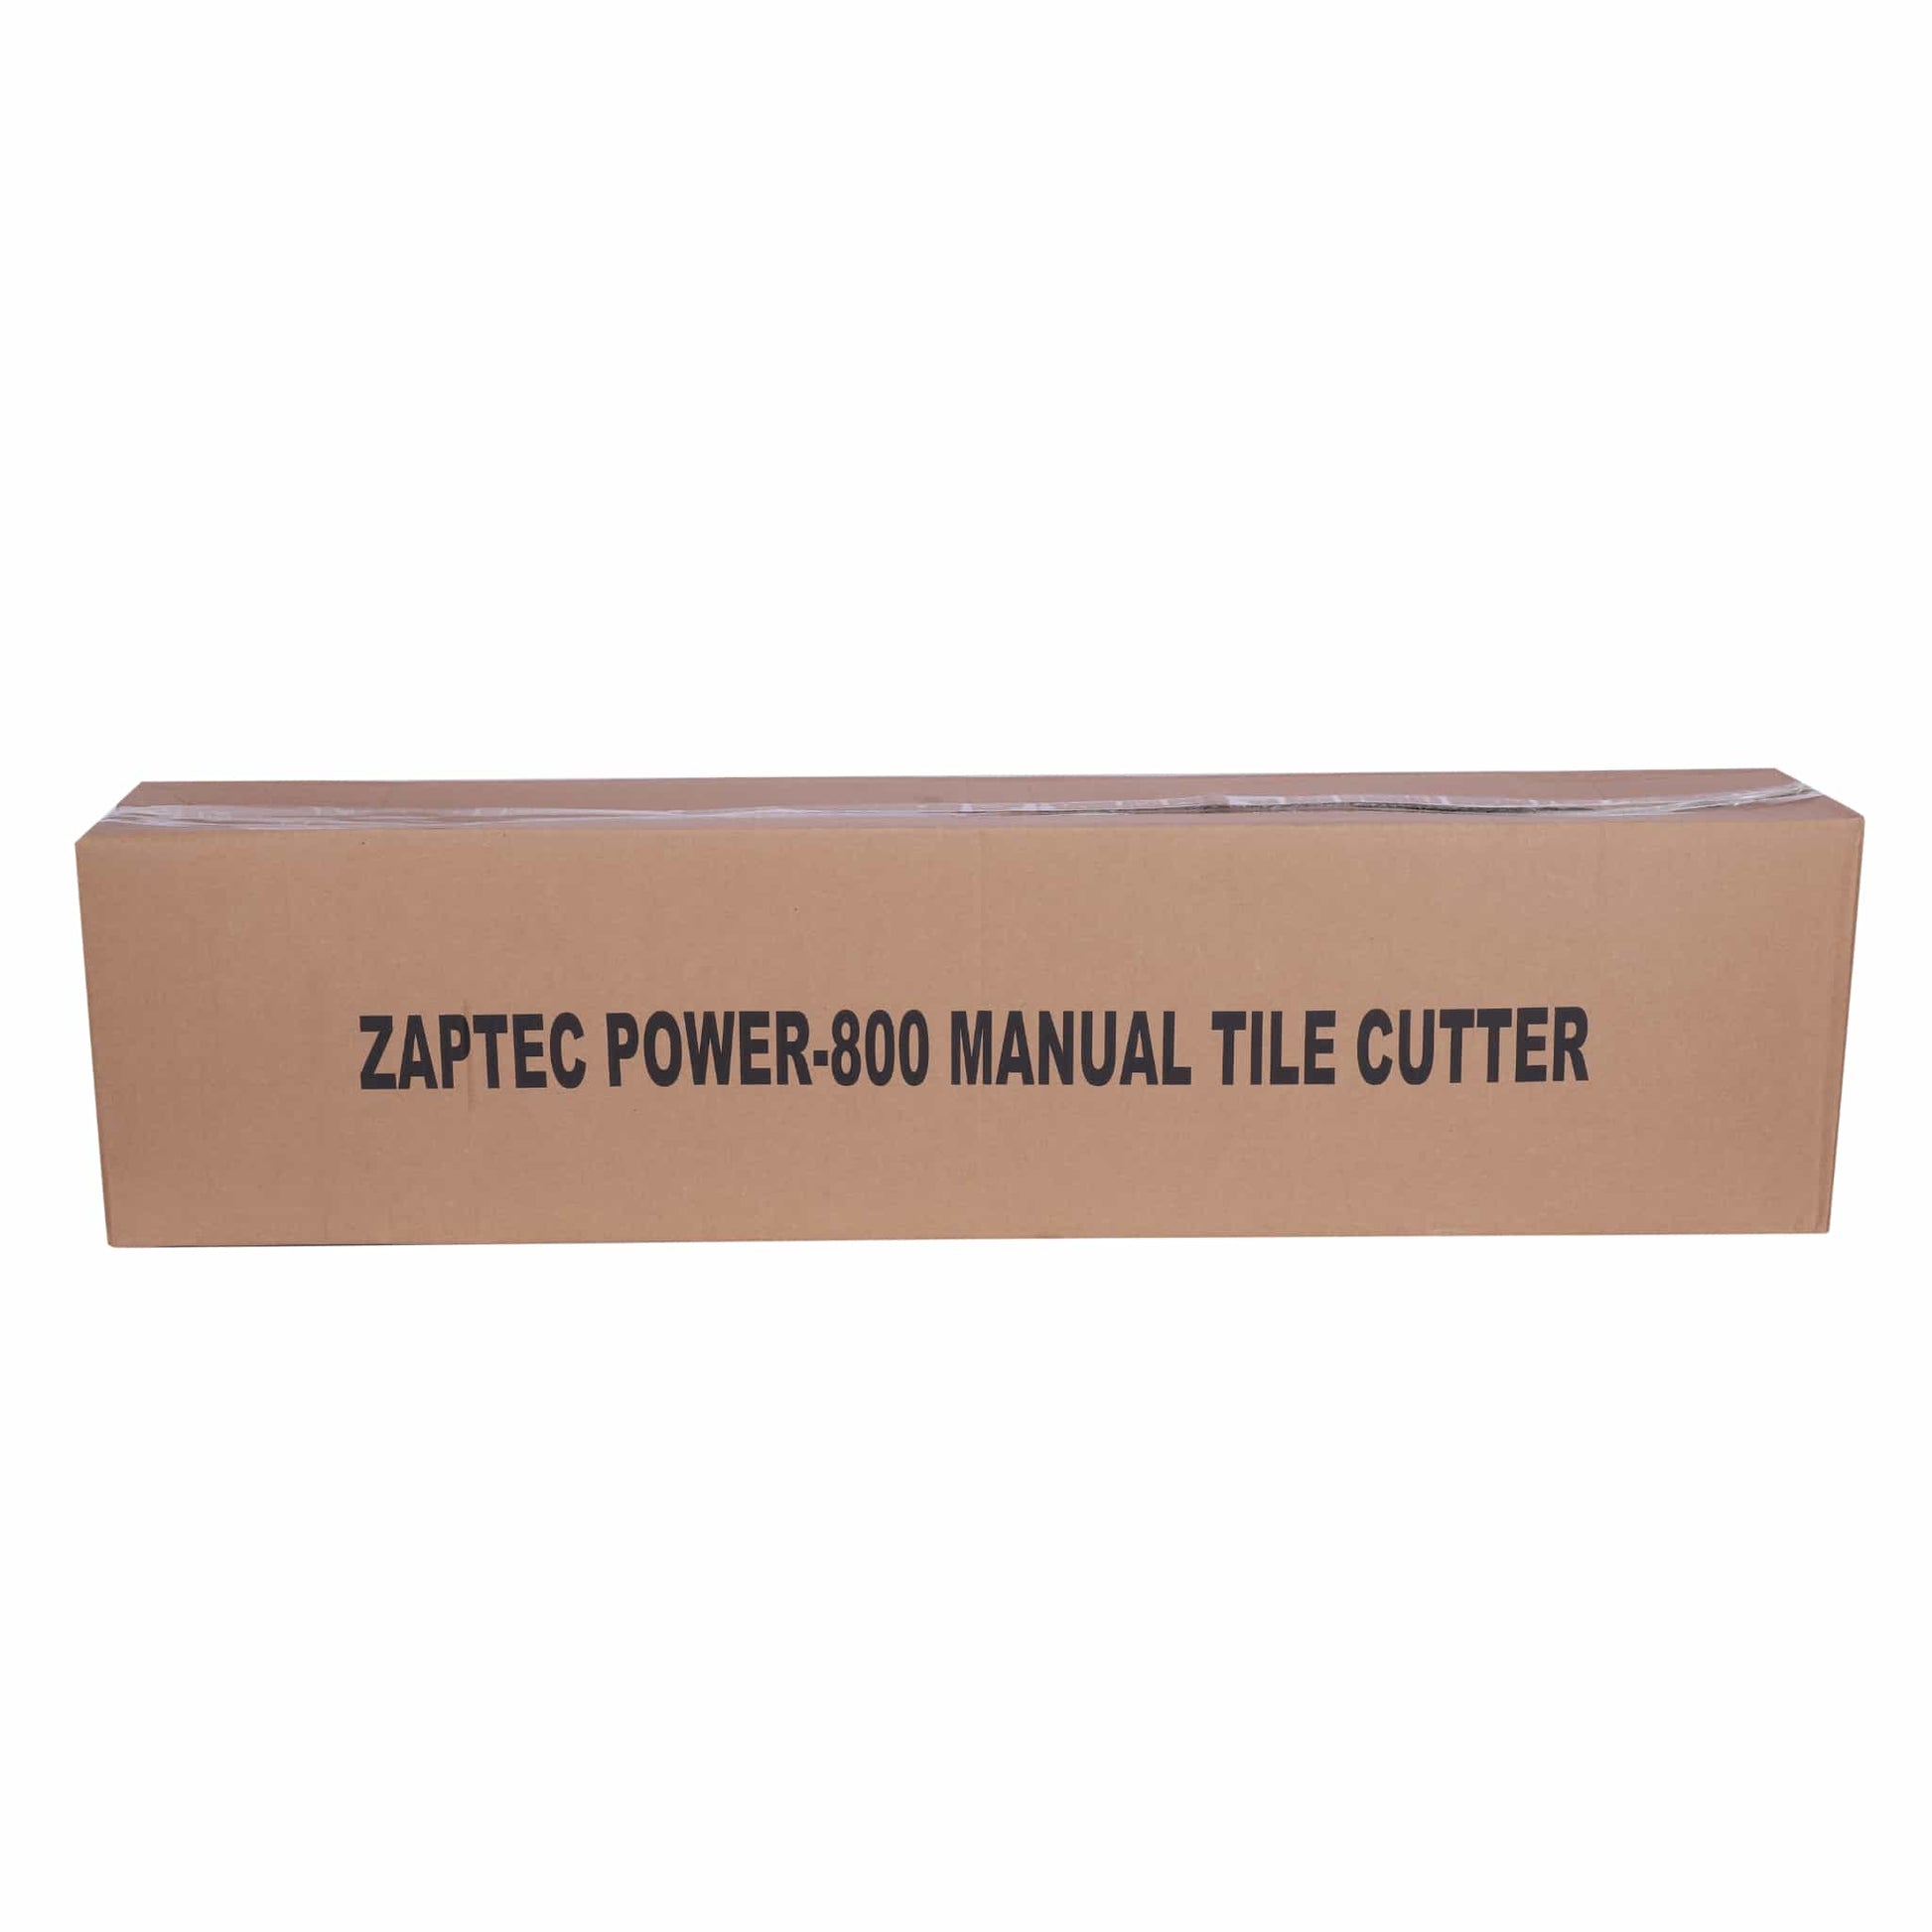 Zaptec Power 800 Manual Tile Cutter Packing